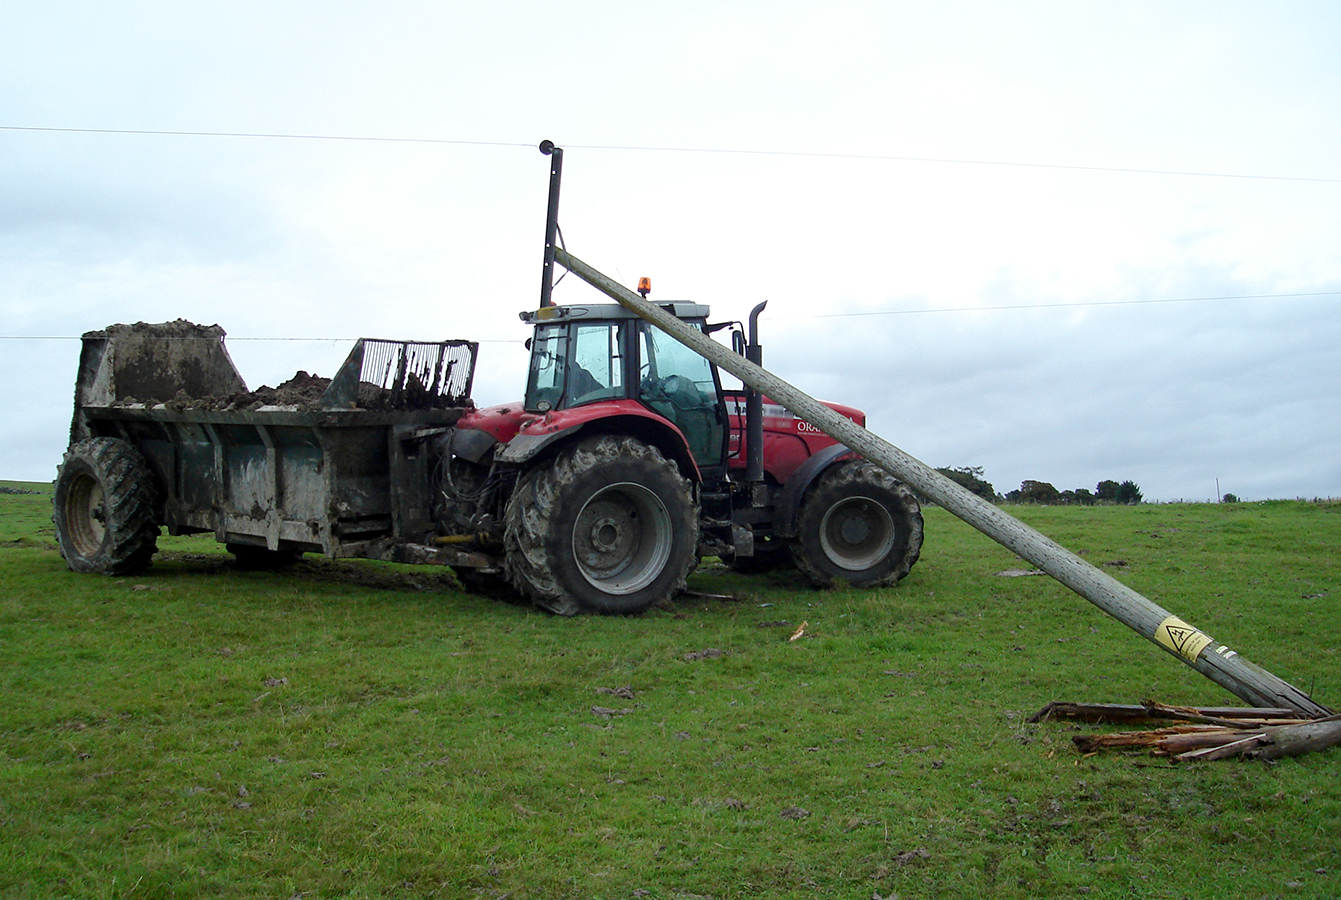 Agricultural vehicles can all too easily become tangled.